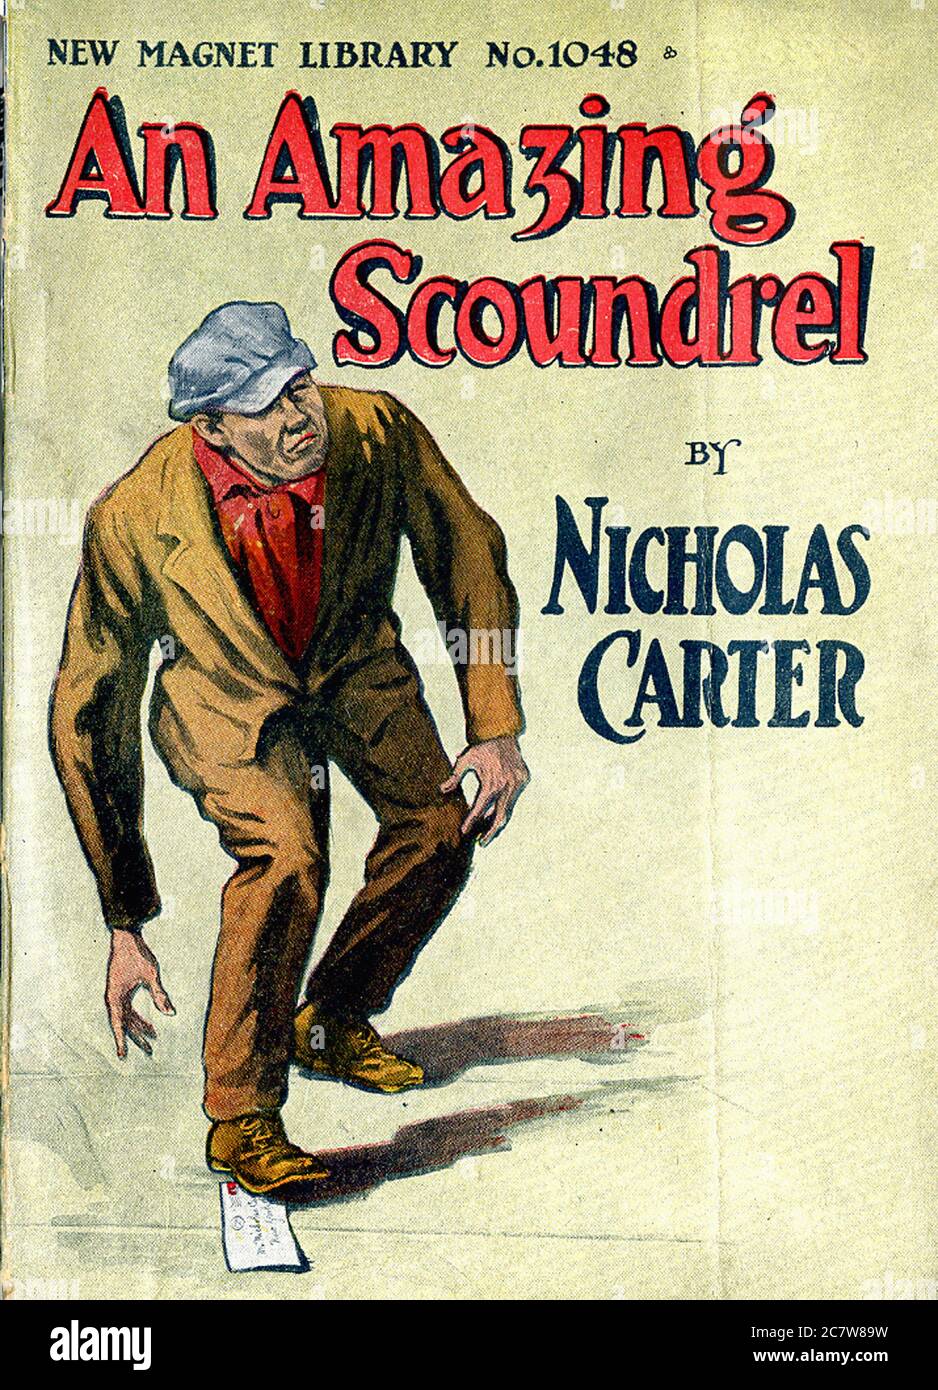 Nicholas Carter - An Amazing Scoundrel - New Magnet Library - Vintage Pulp Literary Stock Photo